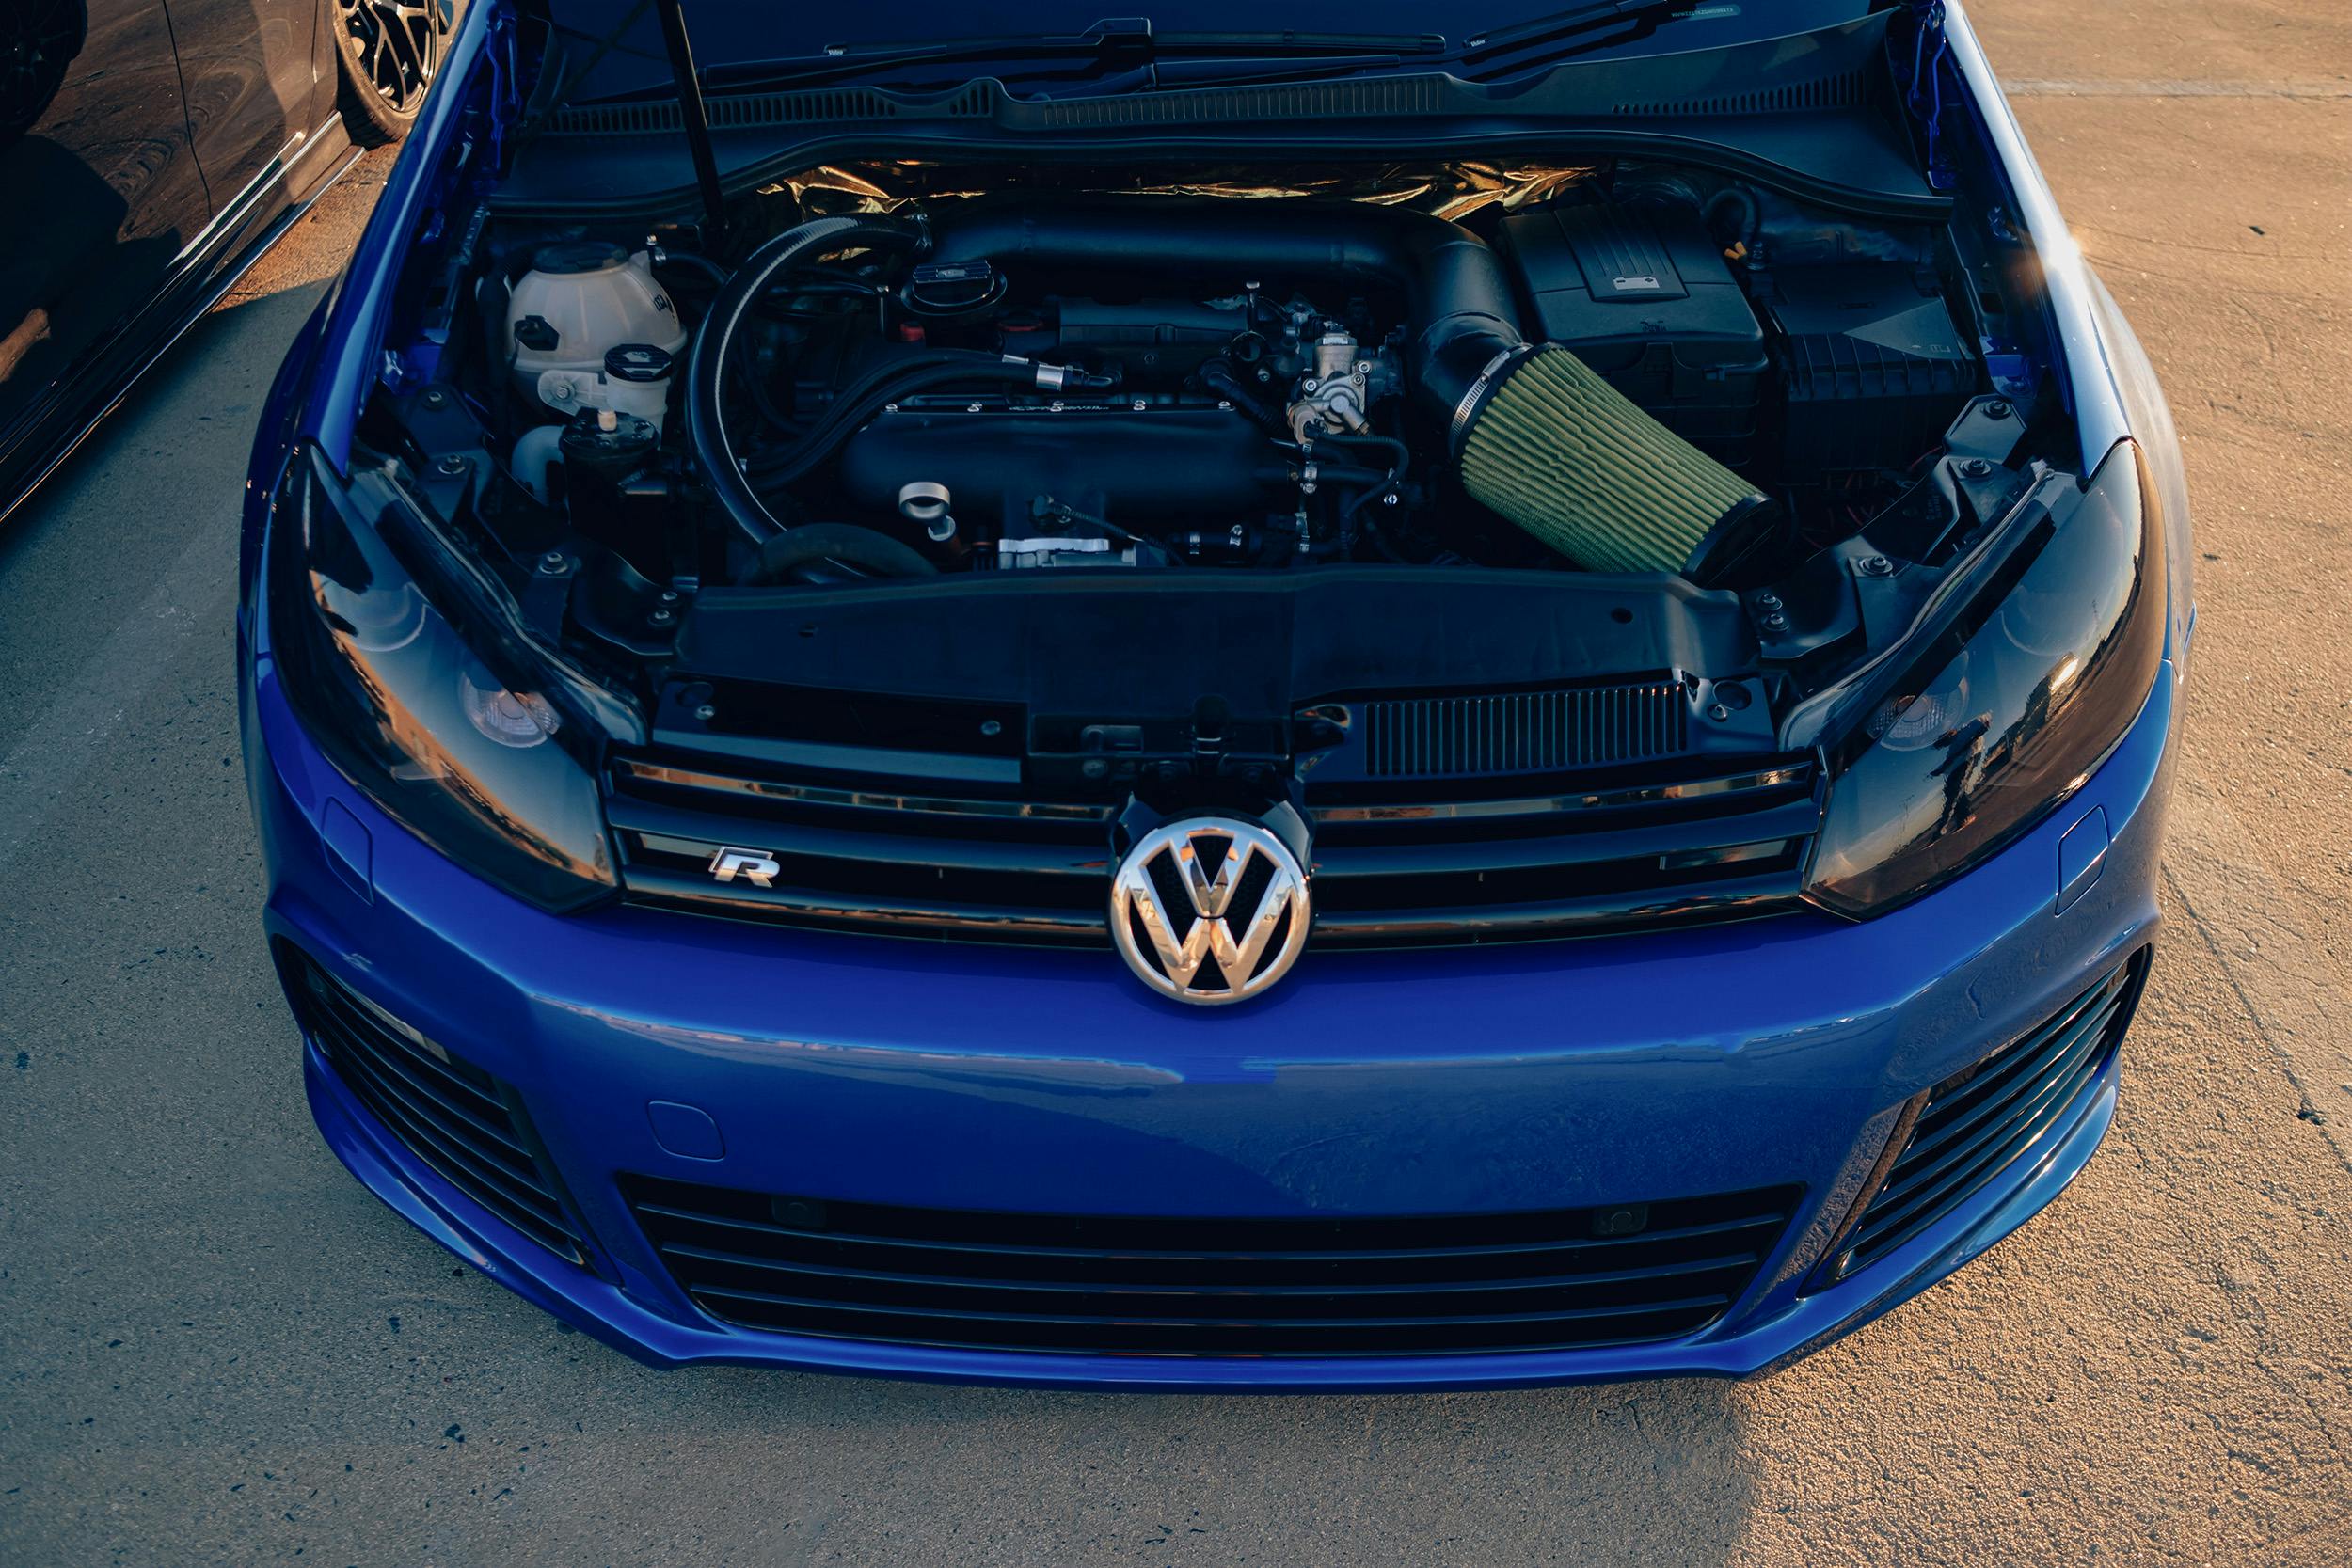 Air Lift Performance Around The World South Africa - VW Golf R trio turbo